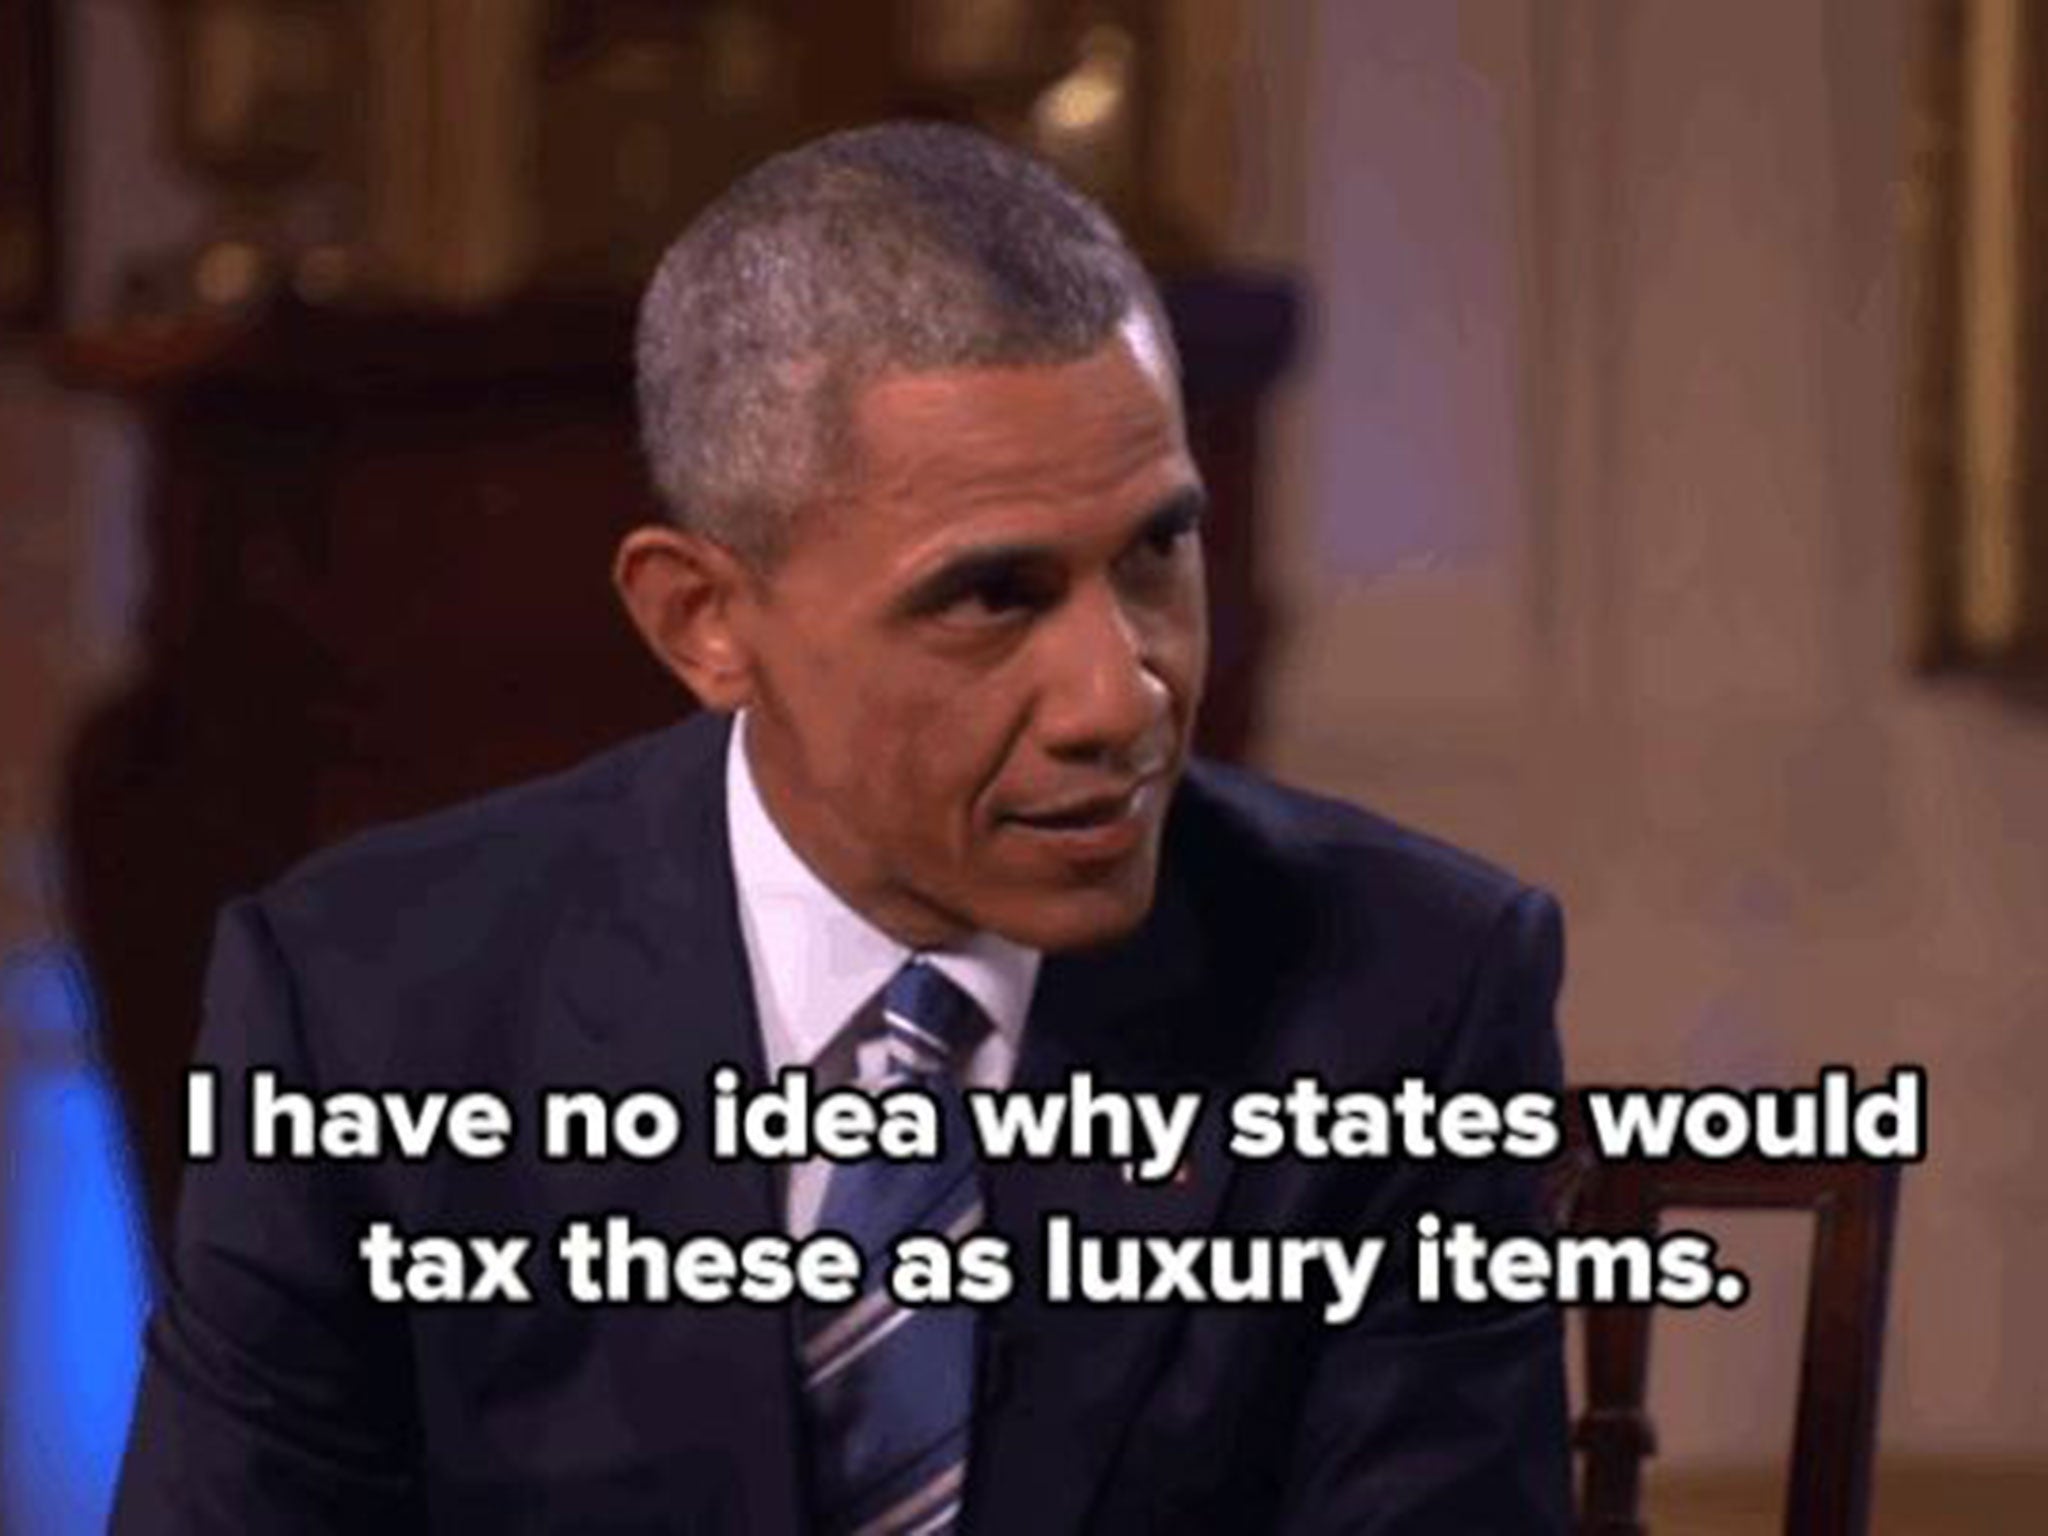 President Obama called the tax 'shocking' and 'unfair'